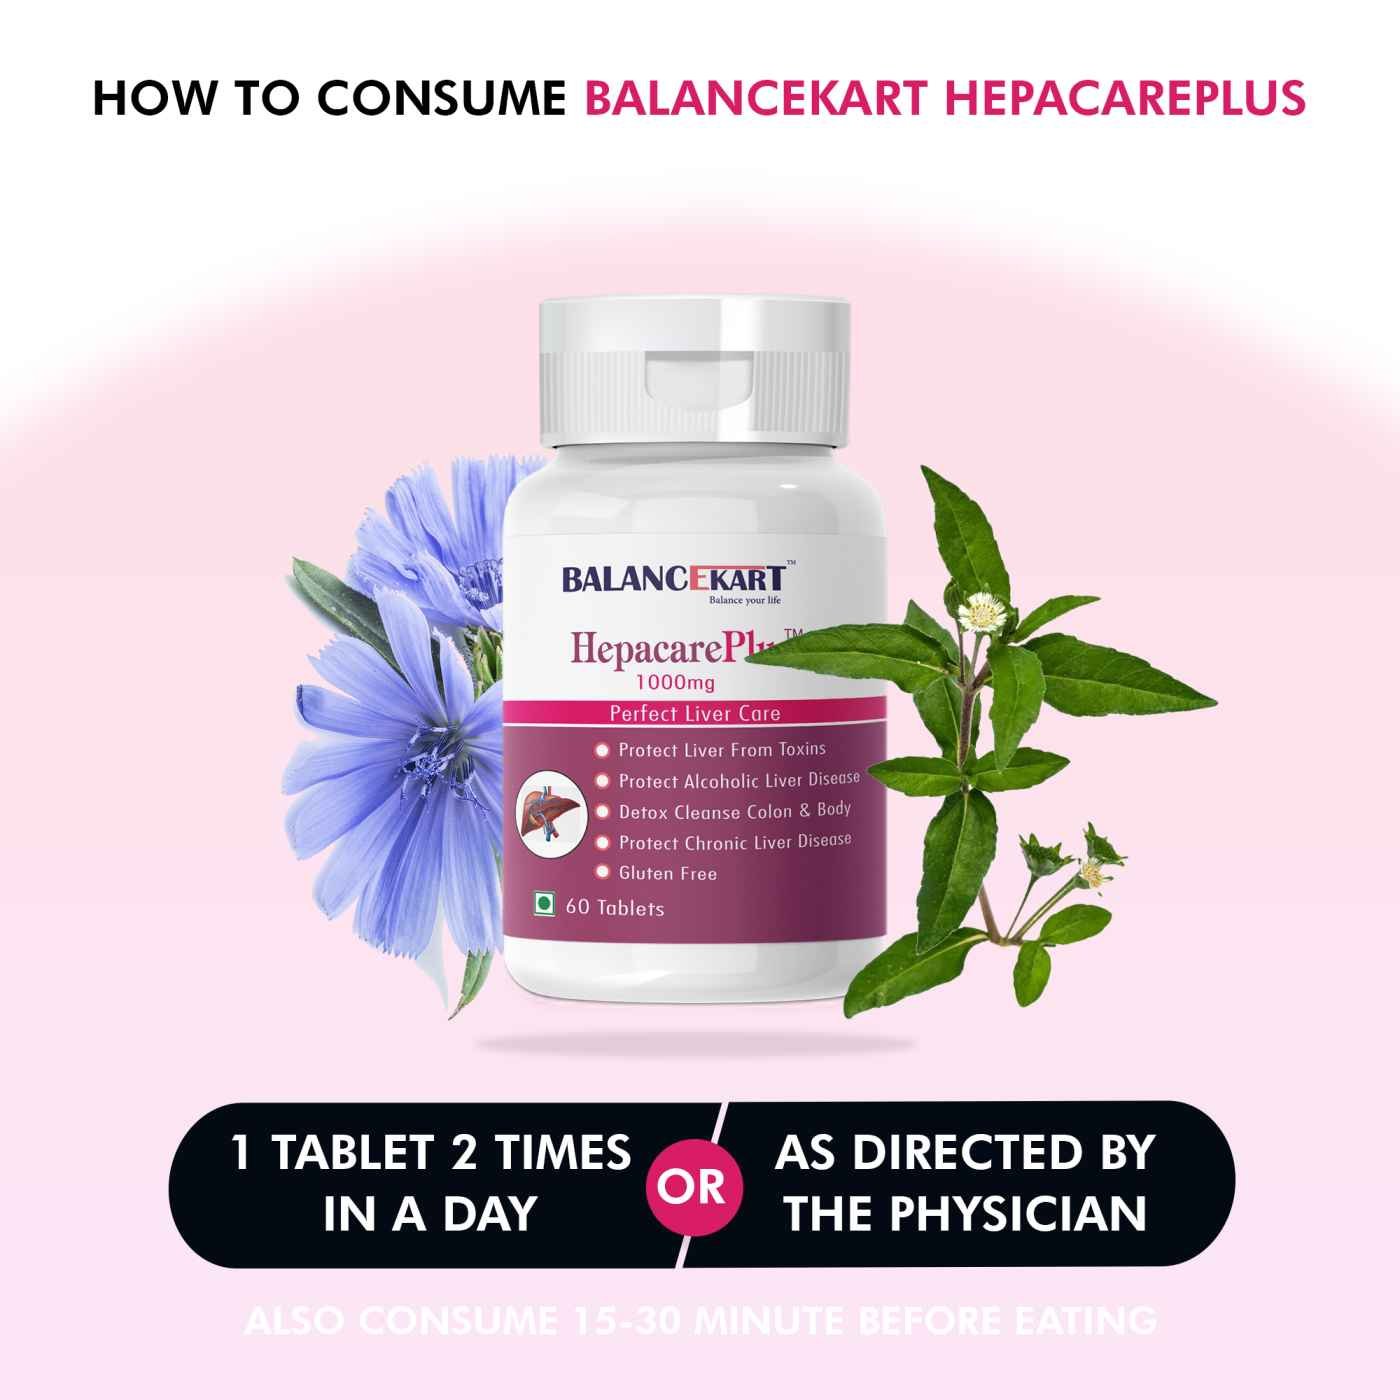 Hepacare Plus (60 Tablets) Liver Care - A perfect Liver care & Detox Ayurvedic and natural Herbs